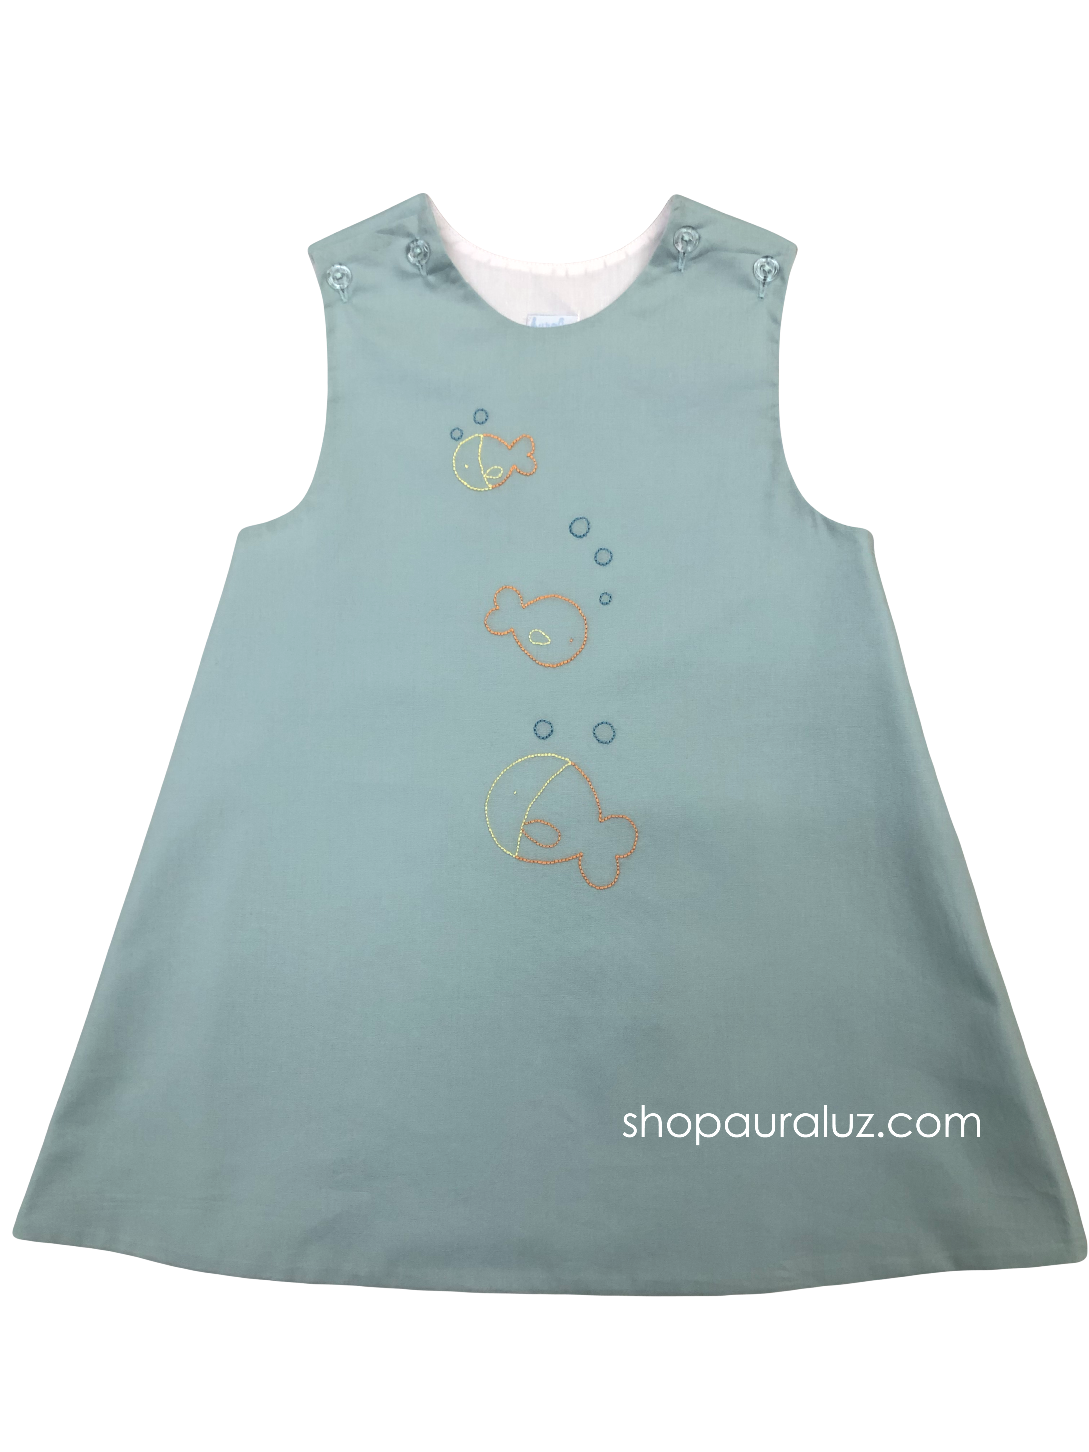 Auraluz Jumper...Teal with embroidered fish